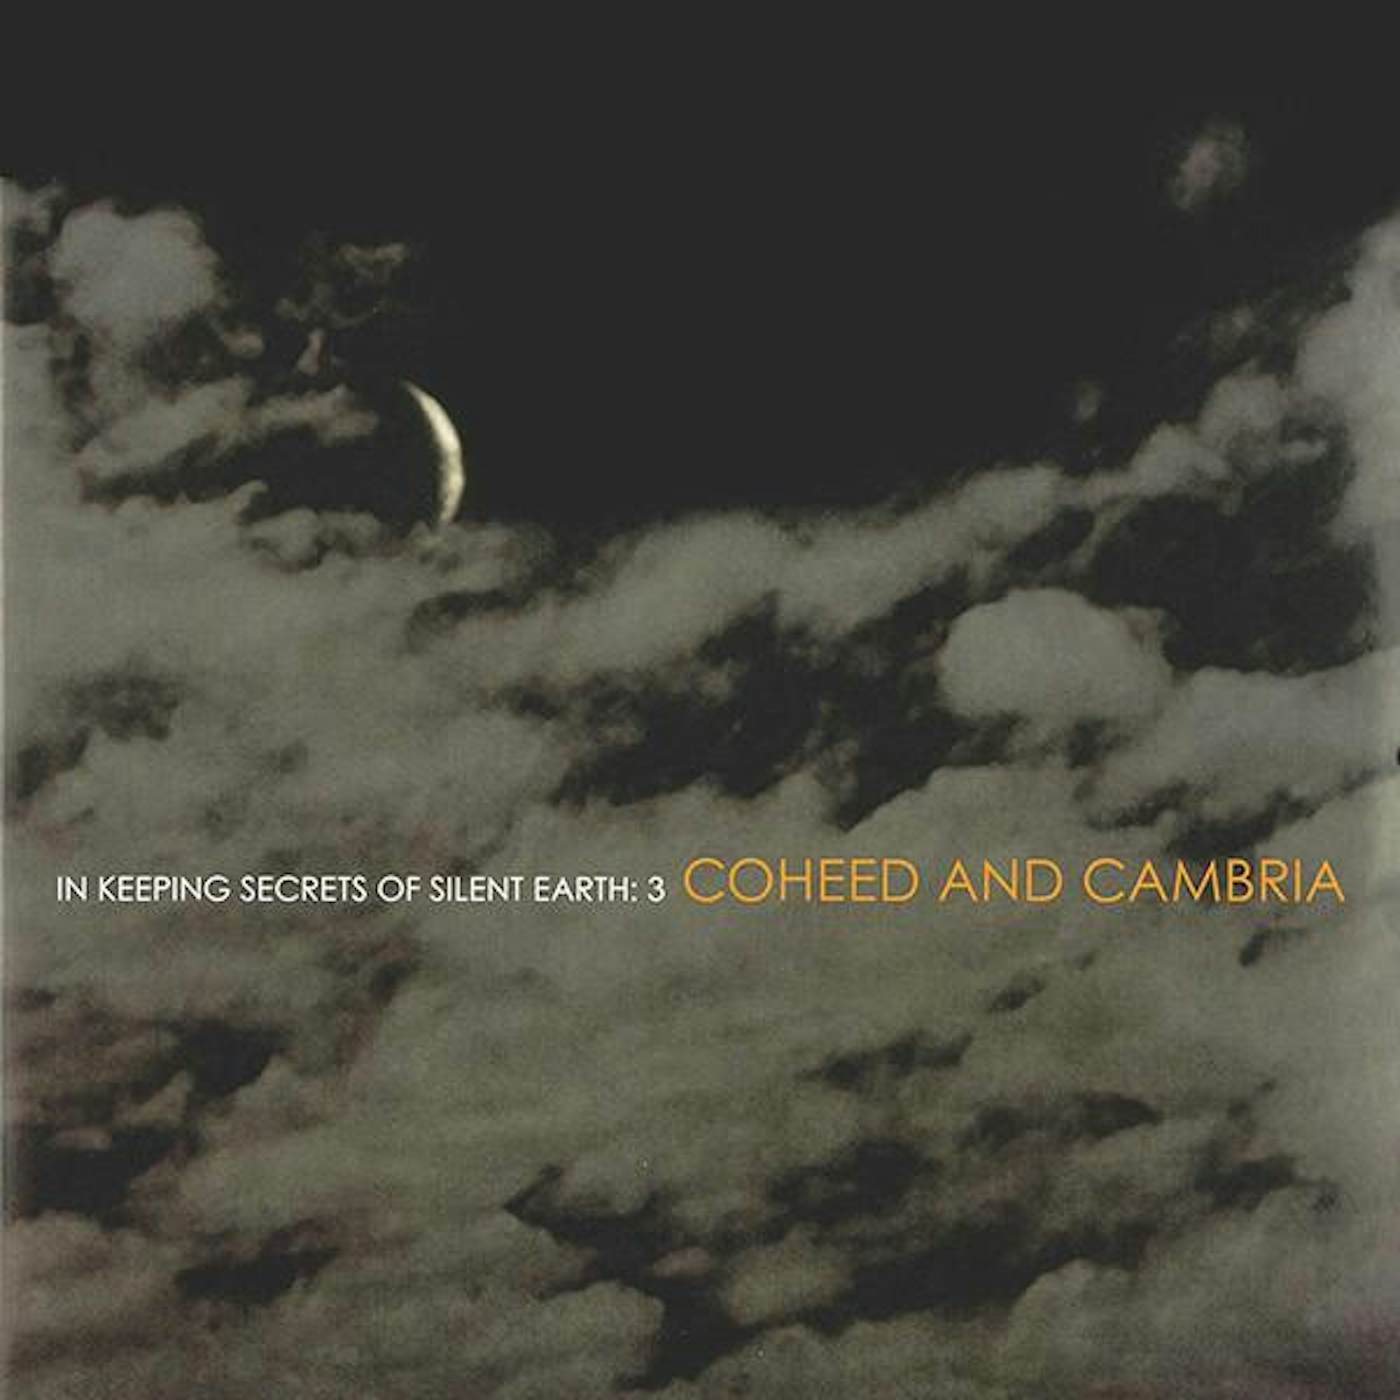 Coheed and Cambria In Keeping Secrets Of Silent Earth: 3 (2LP/180g) Vinyl Record